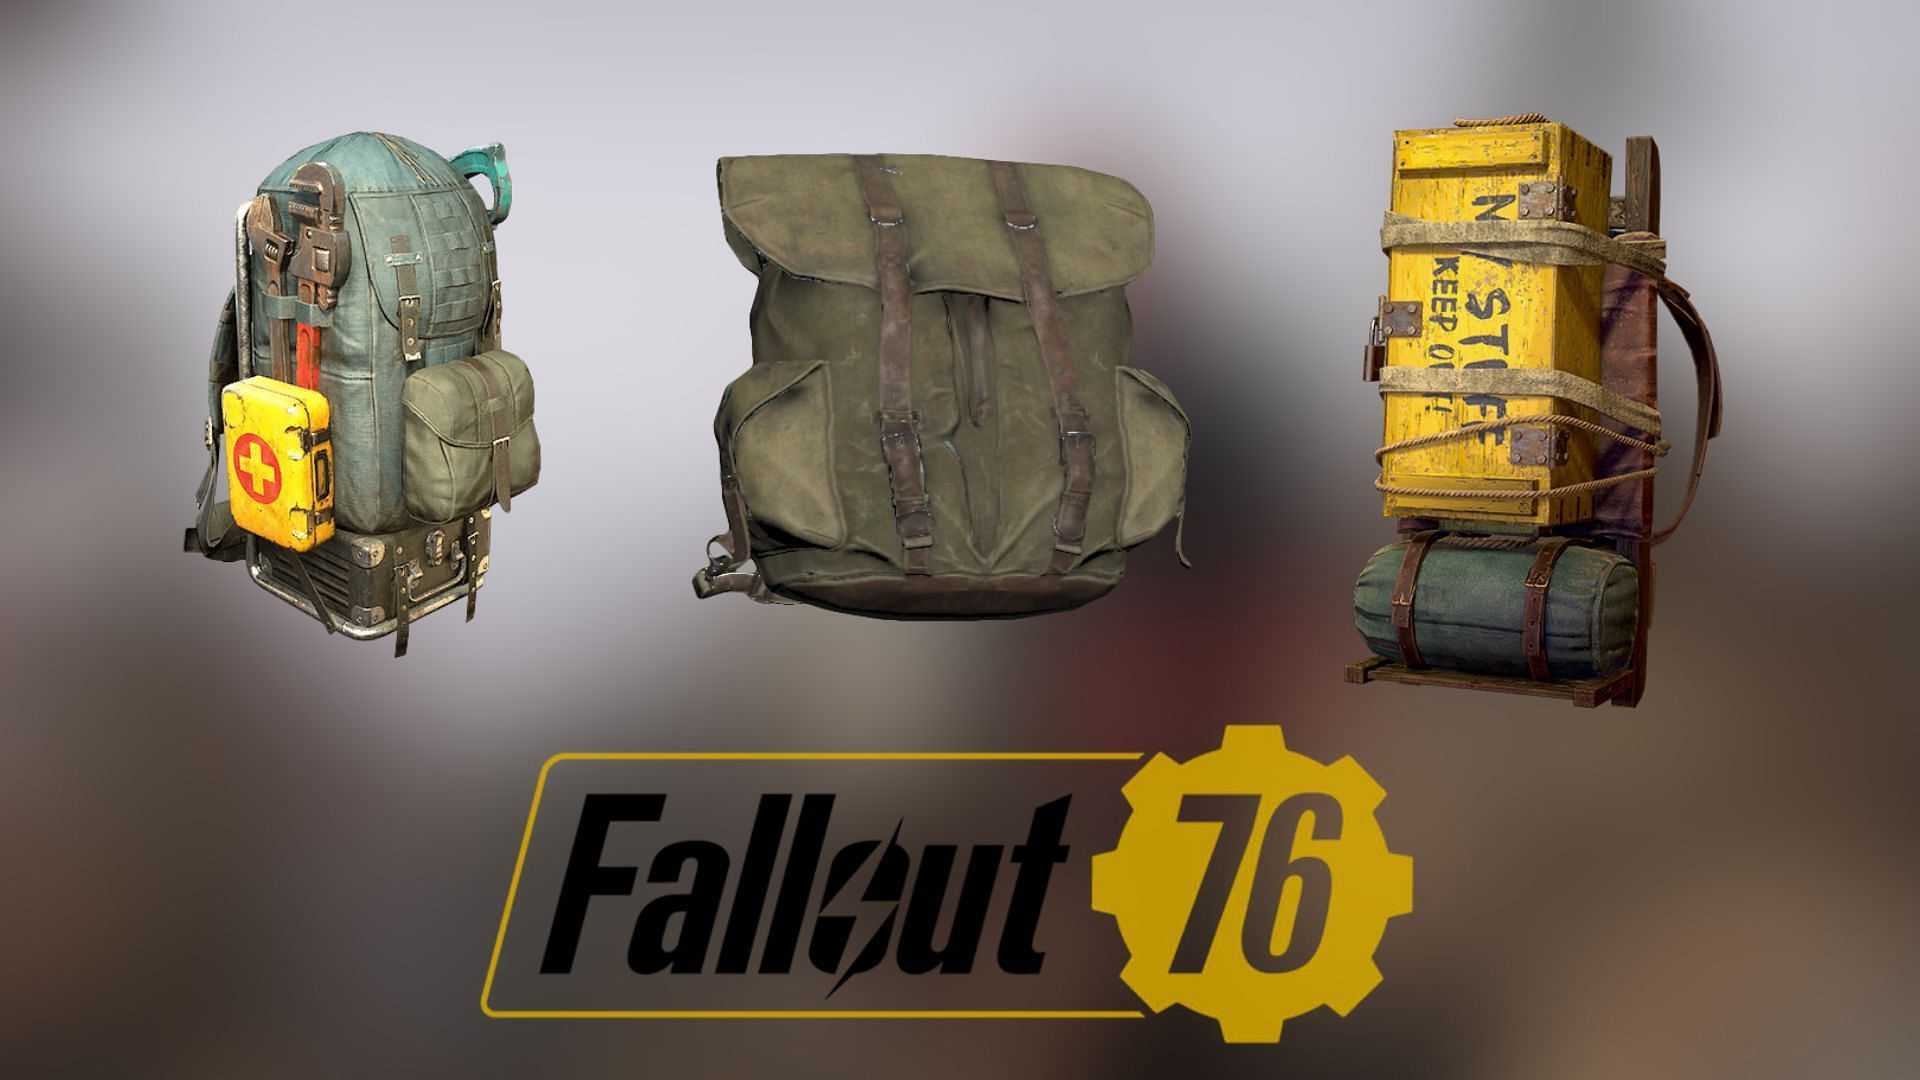 All backpacks in Fallout 76 (Image via Bethesda Game Studios)